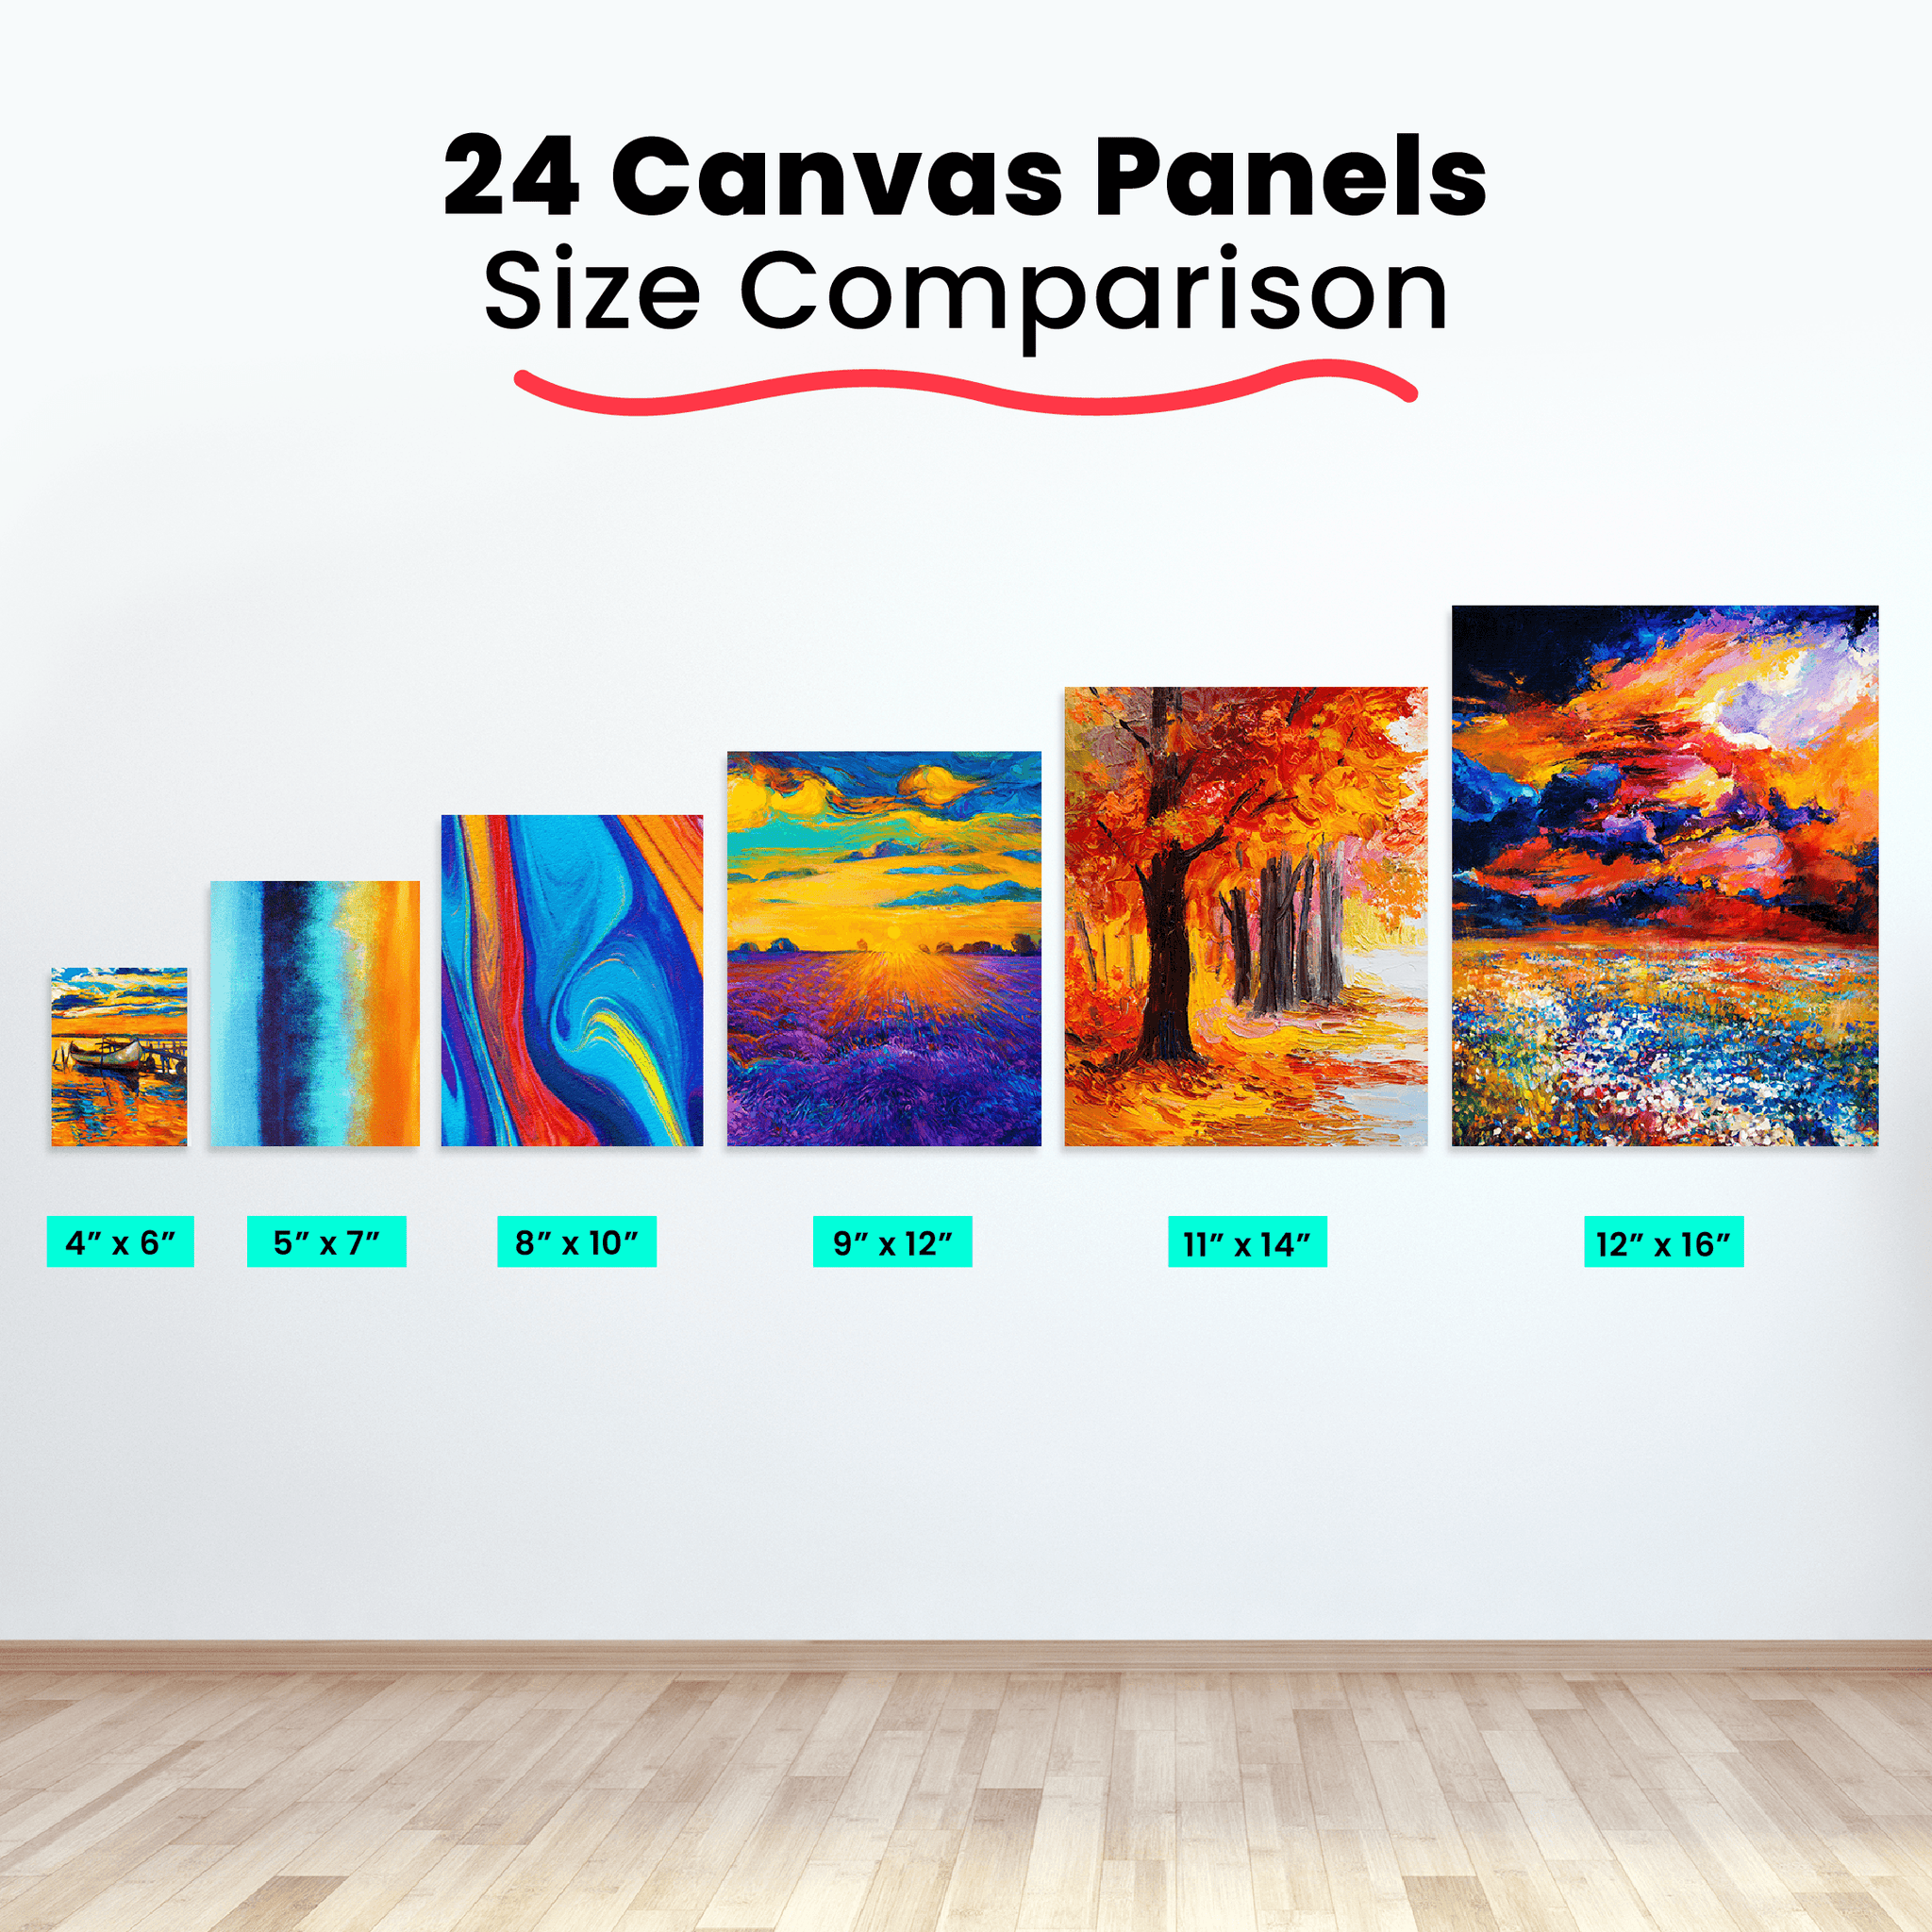 Chalkola Black Canvas for Painting - 24 Pack Canvas Panels - 4x6, 5x7,  8x10, 9x12, 11x14, 12x16 inch (4 Each) - Canvases are 100% Cotton, Primed,  Acid